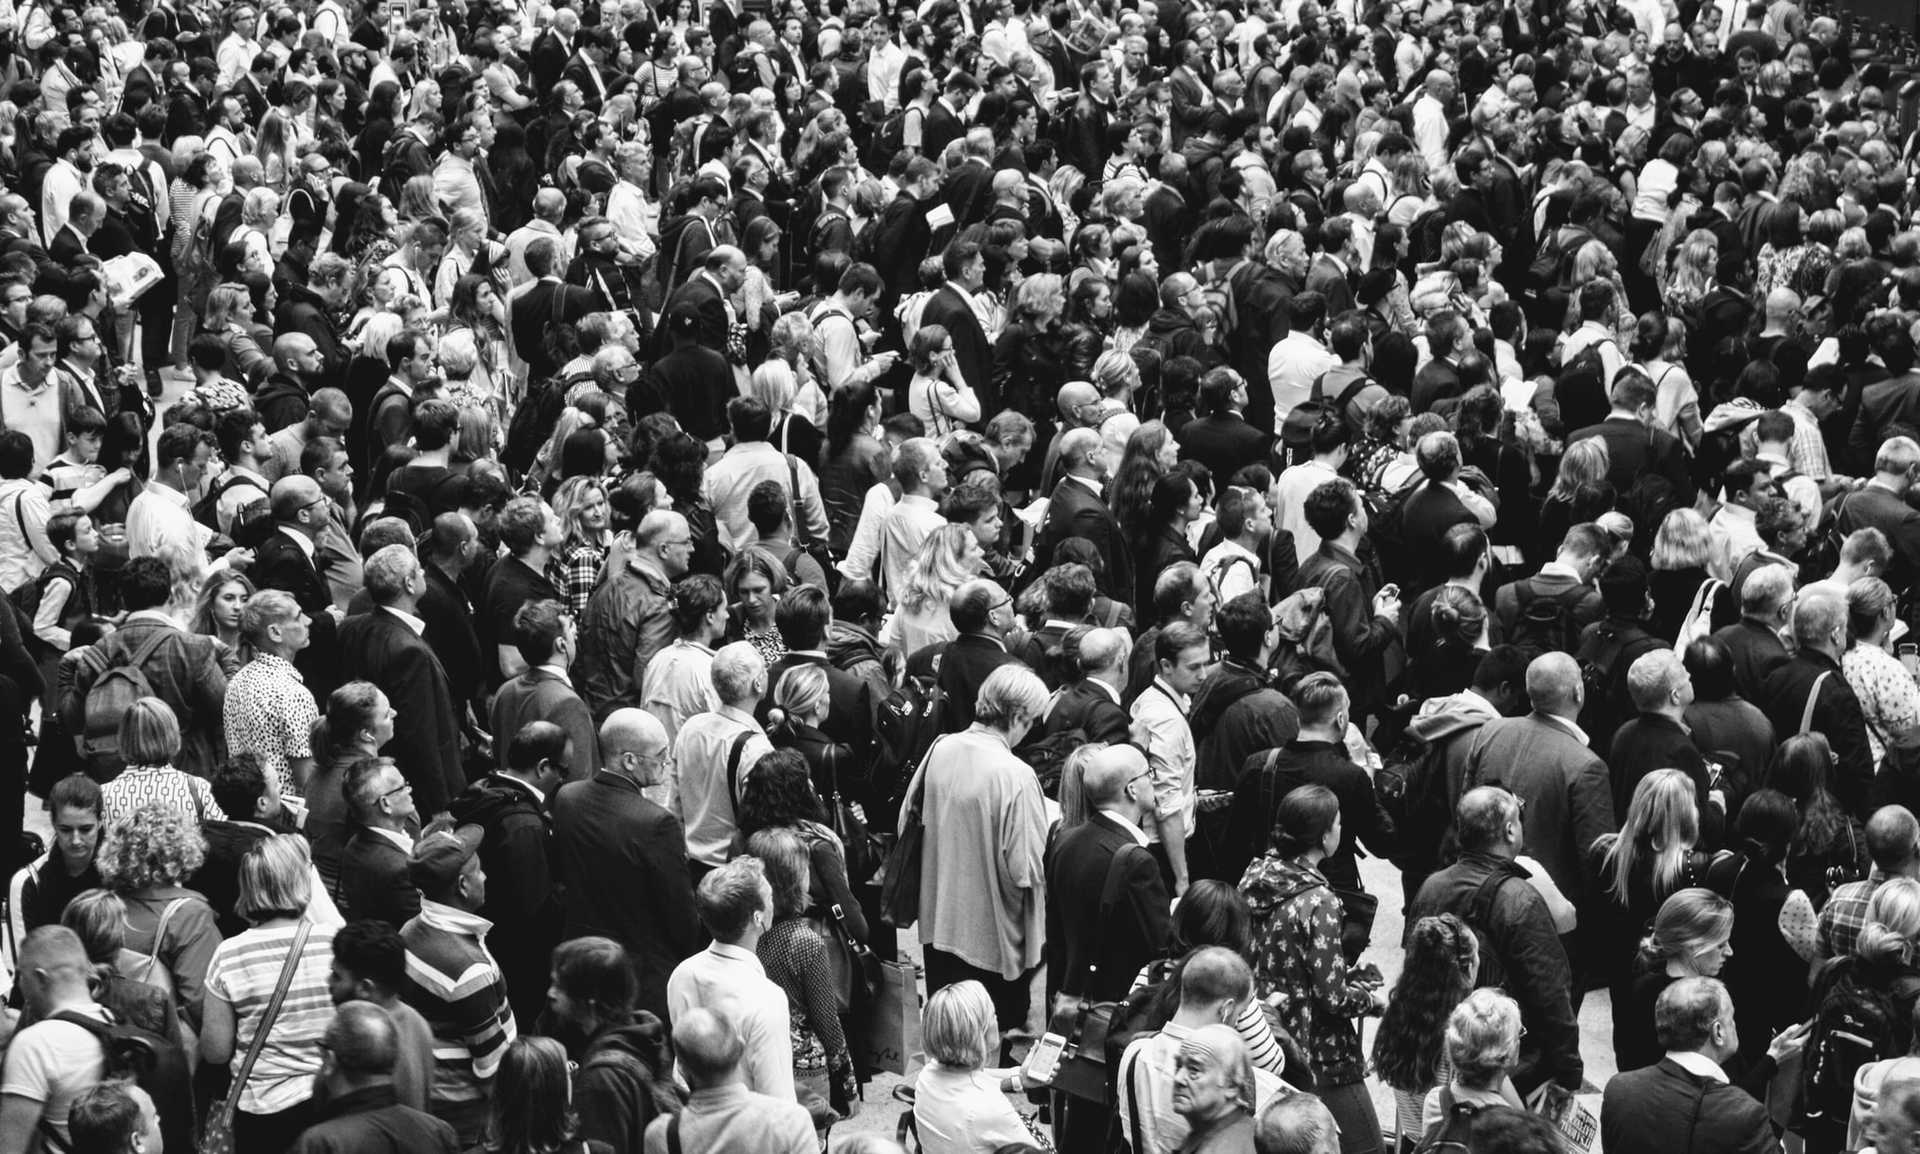 A black and white photo of a large crowd.